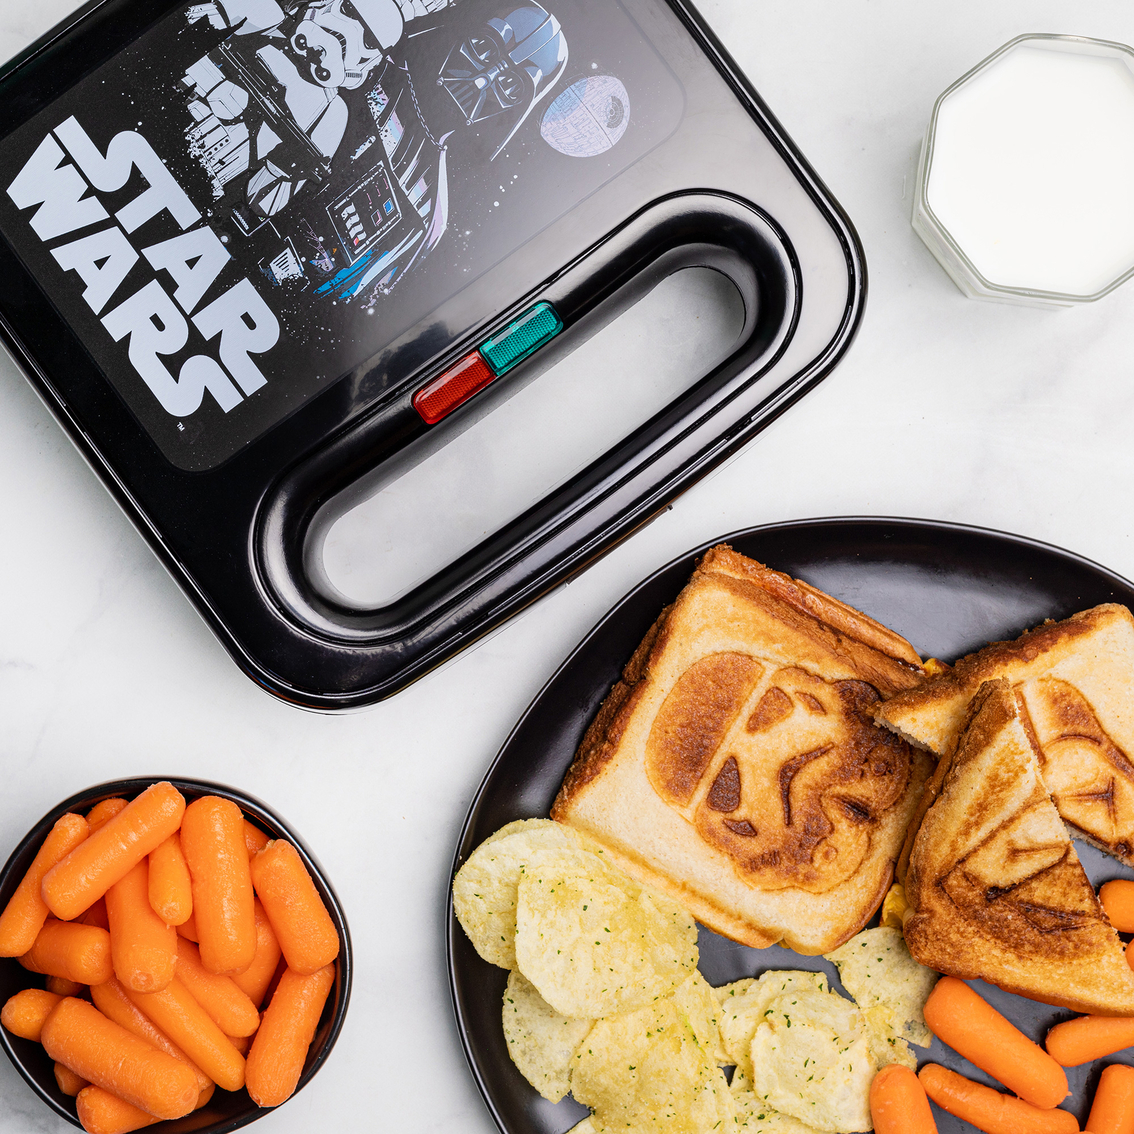 Star Wars Grilled Cheese Maker - Image 6 of 6